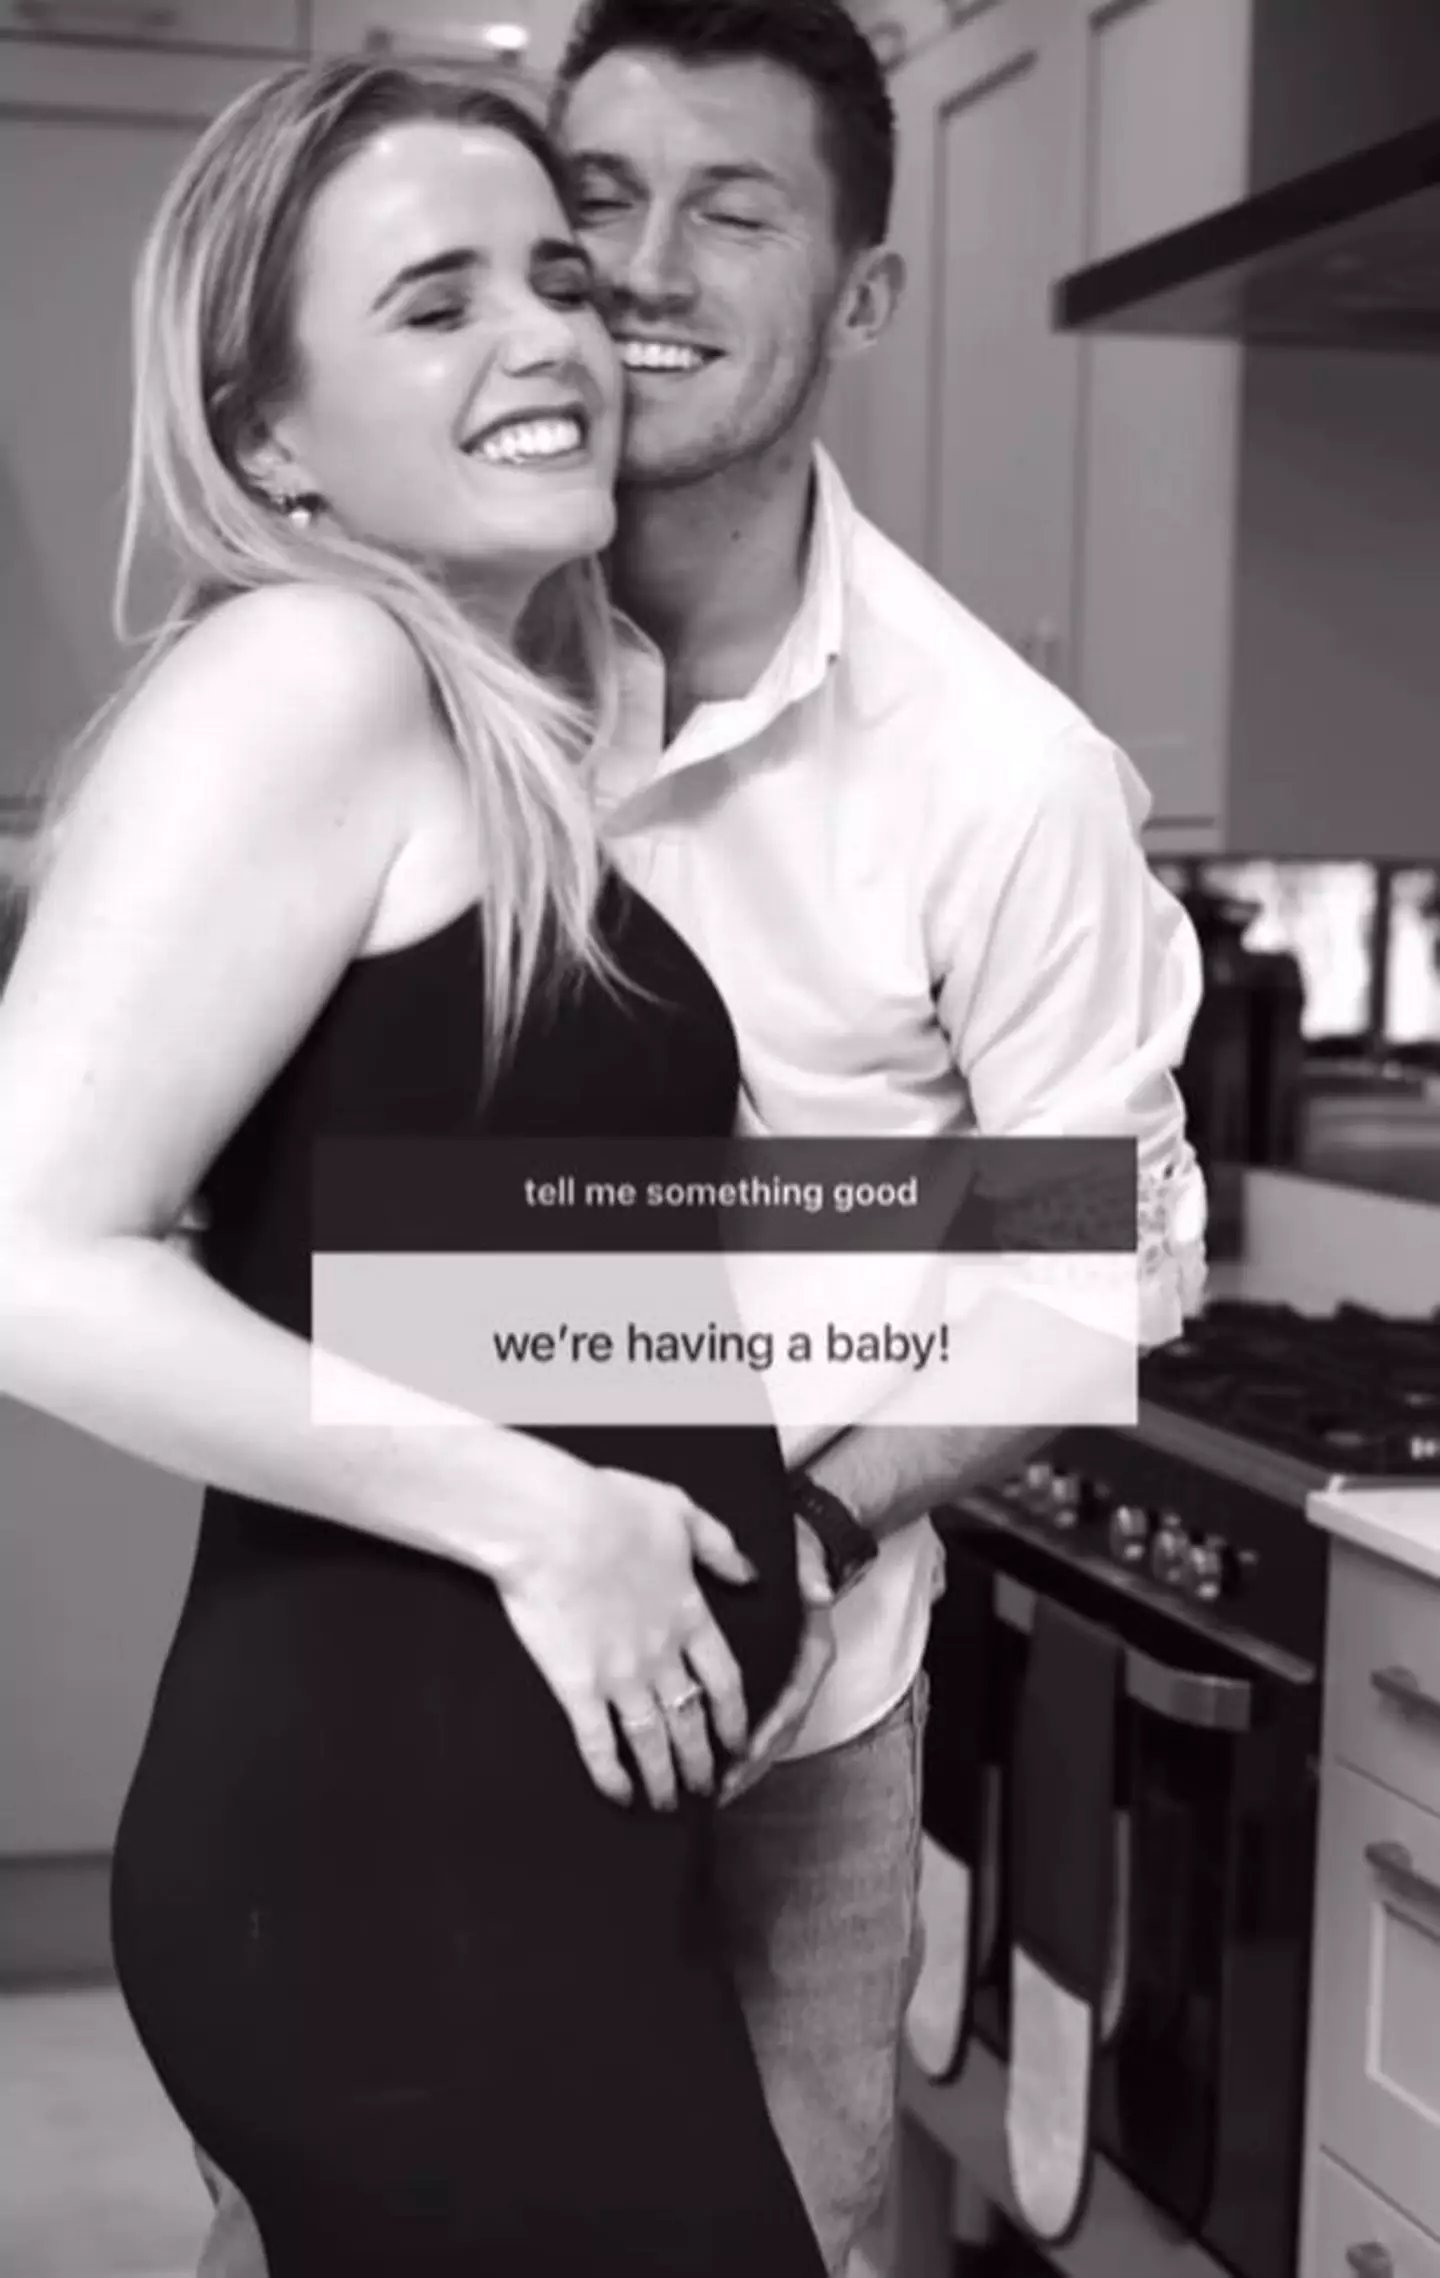 The announcement that the couple were expecting came in September last year.